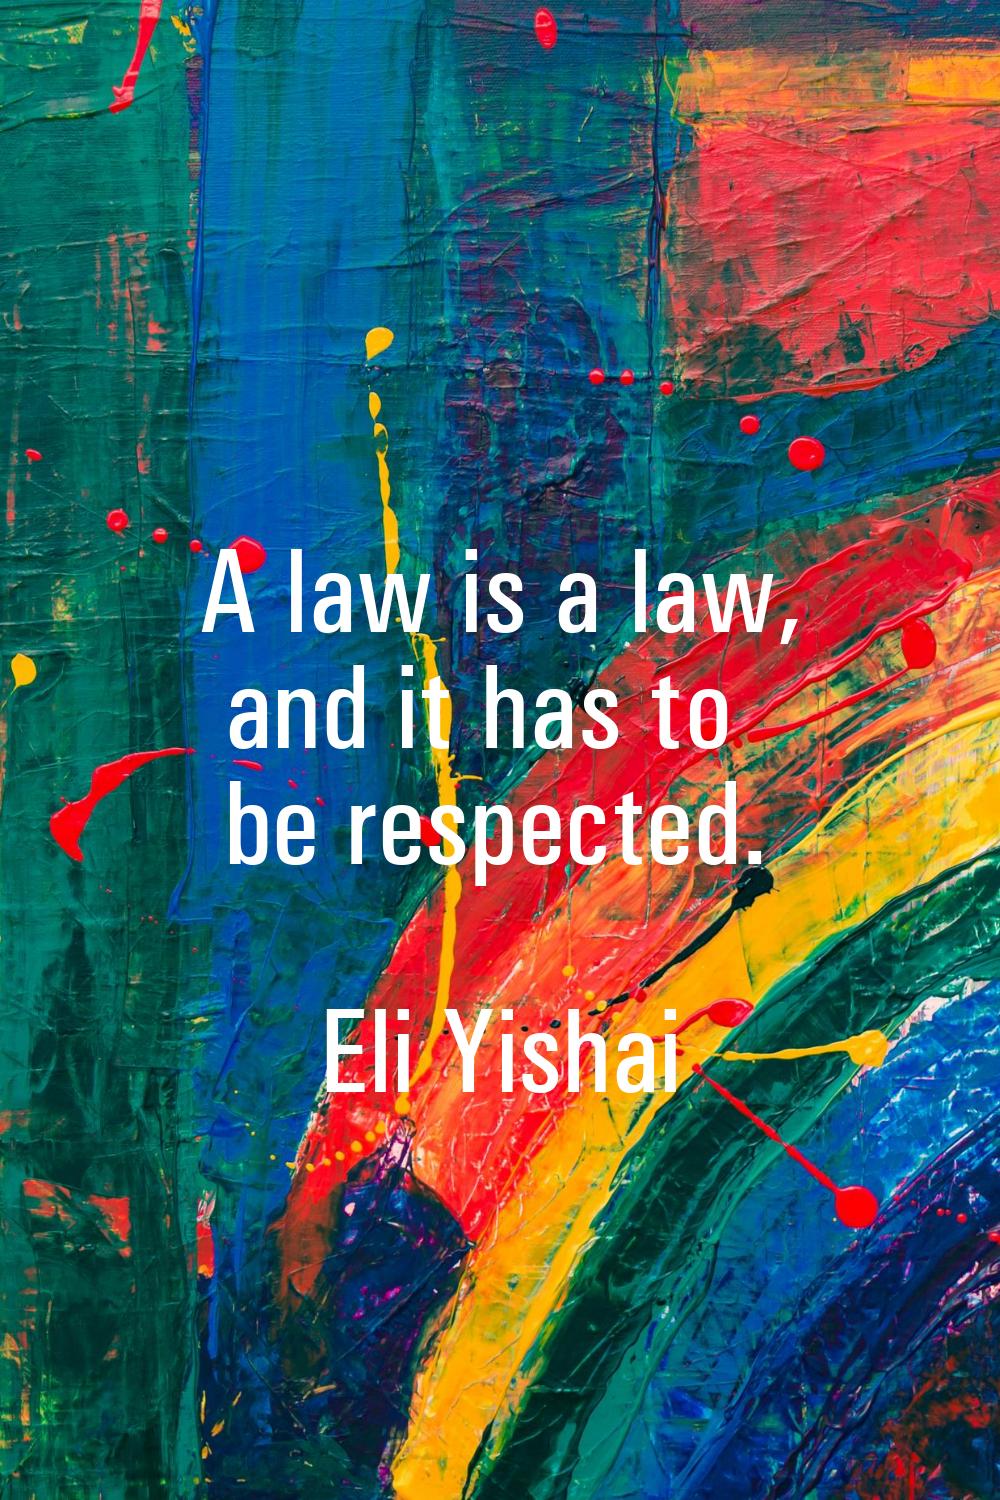 A law is a law, and it has to be respected.